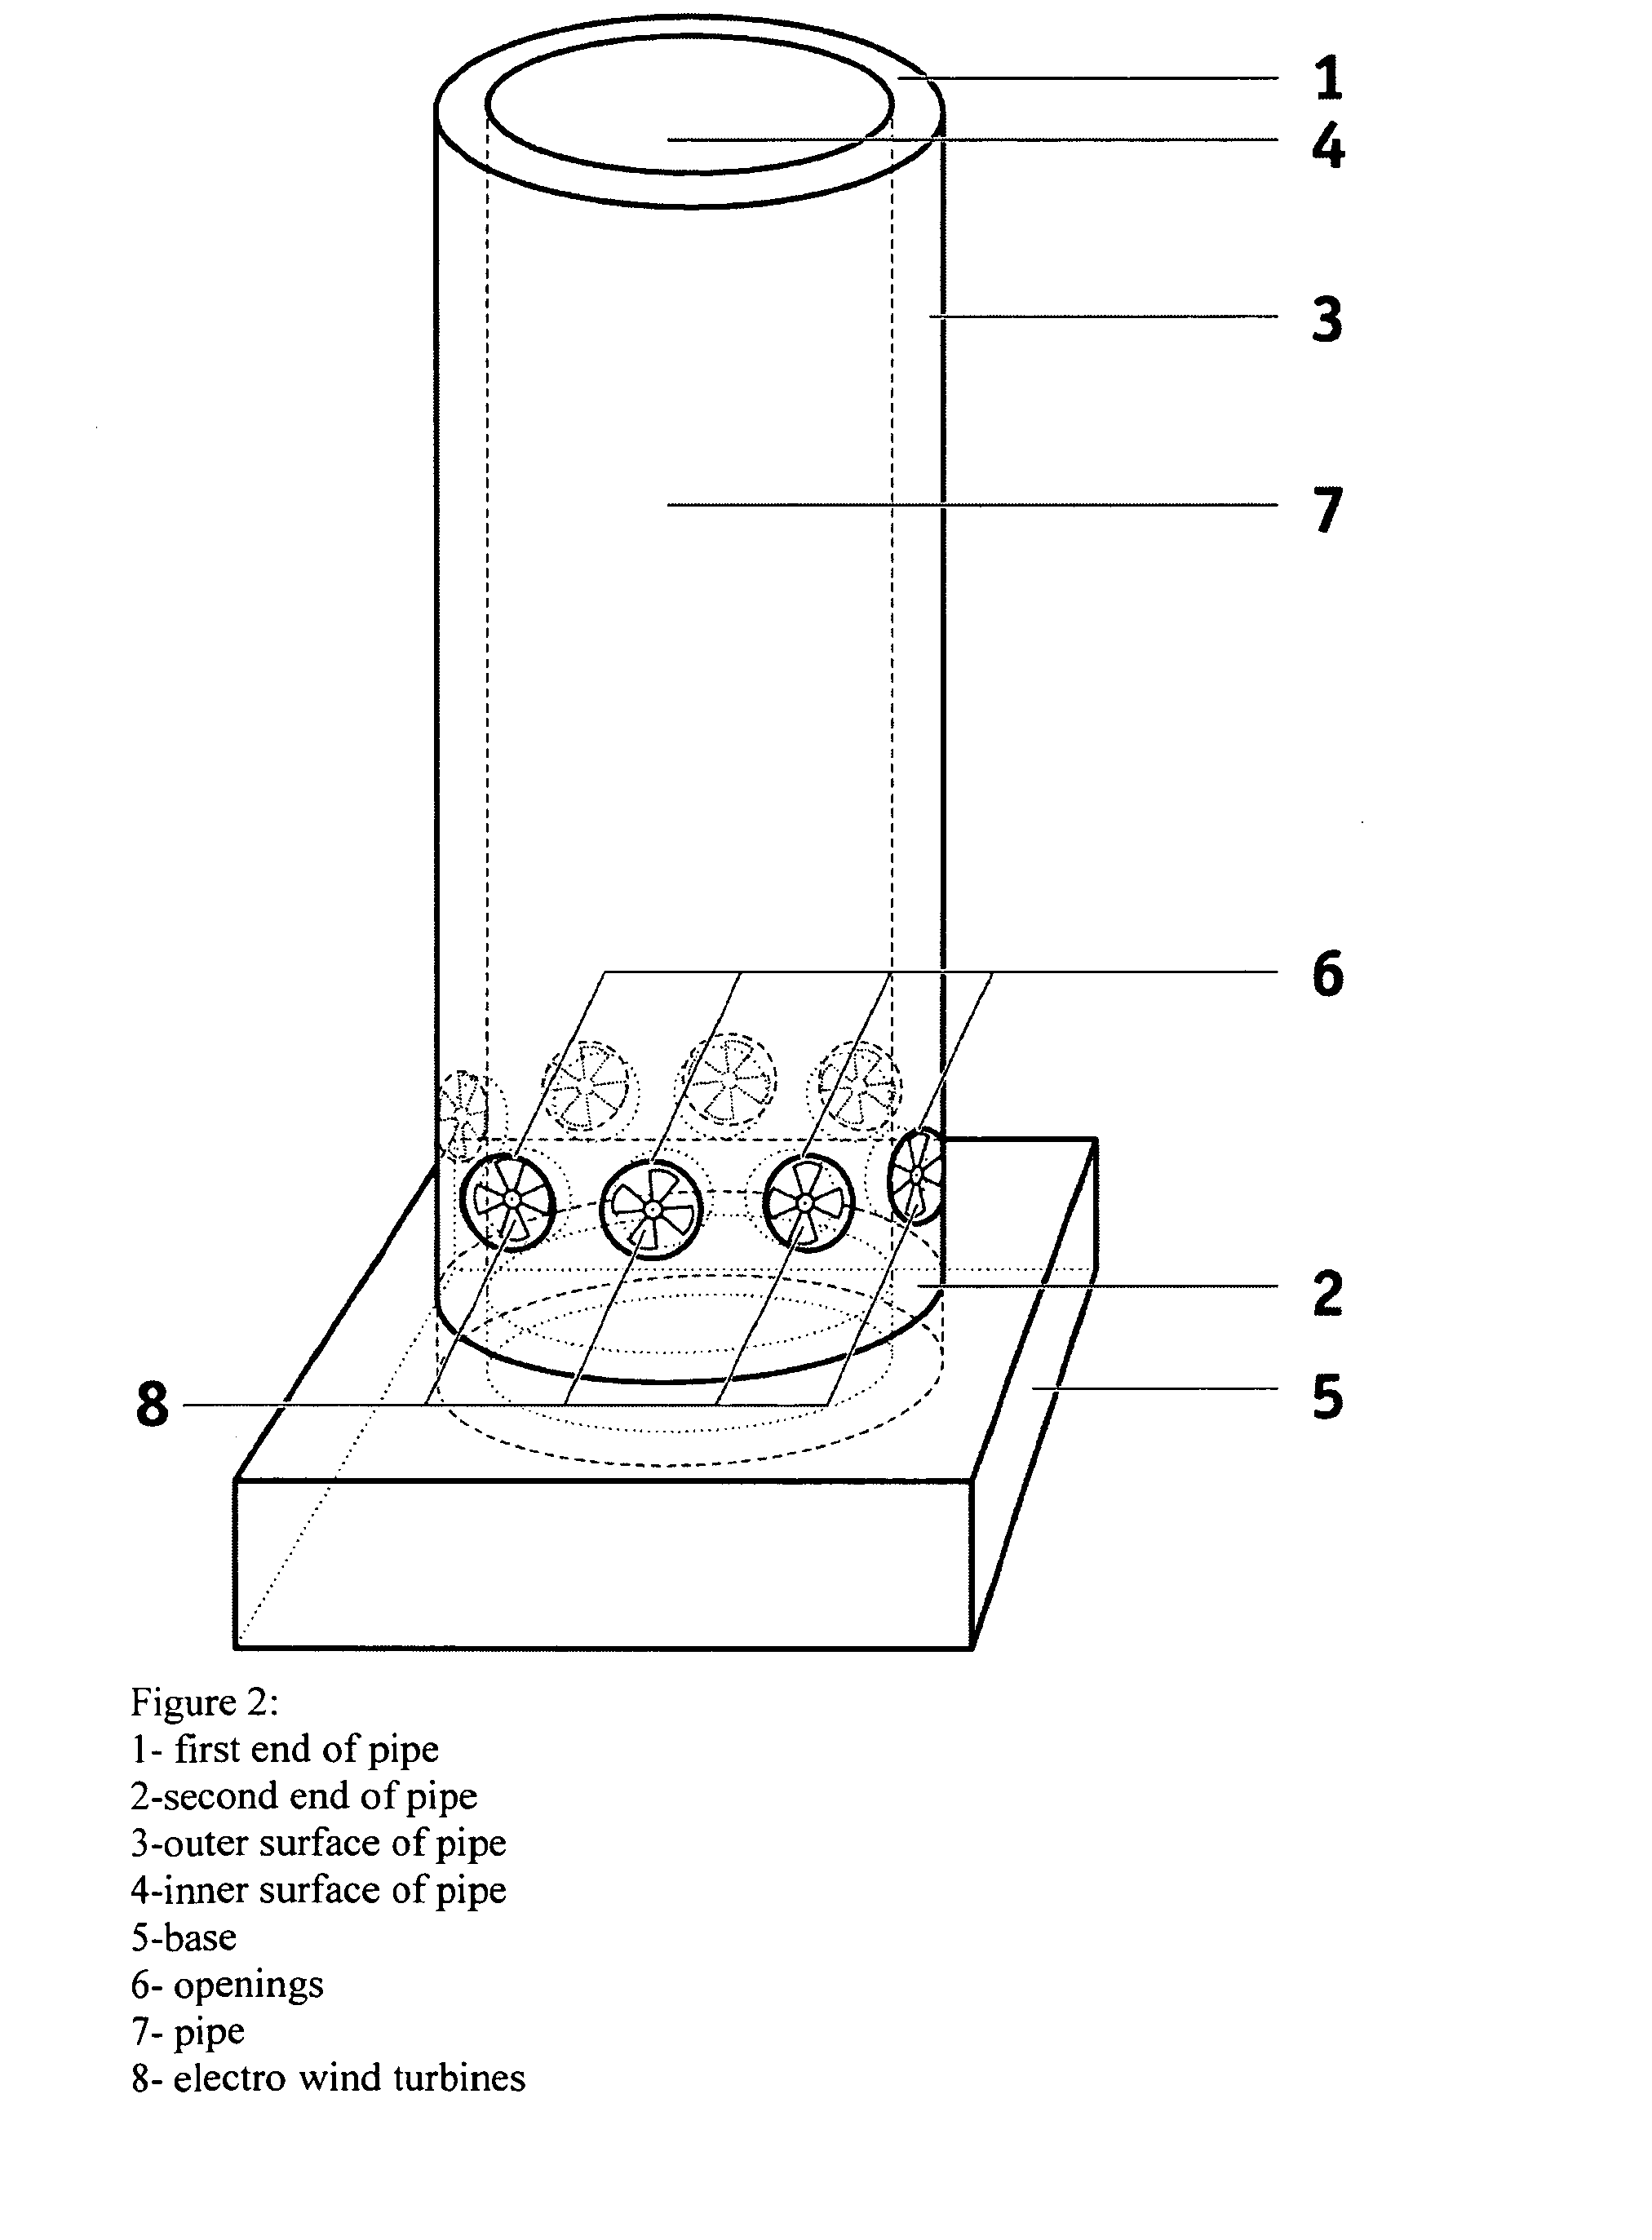 Chimney device and methods of using it to fight global warming, produce water precipitation and produce electricity